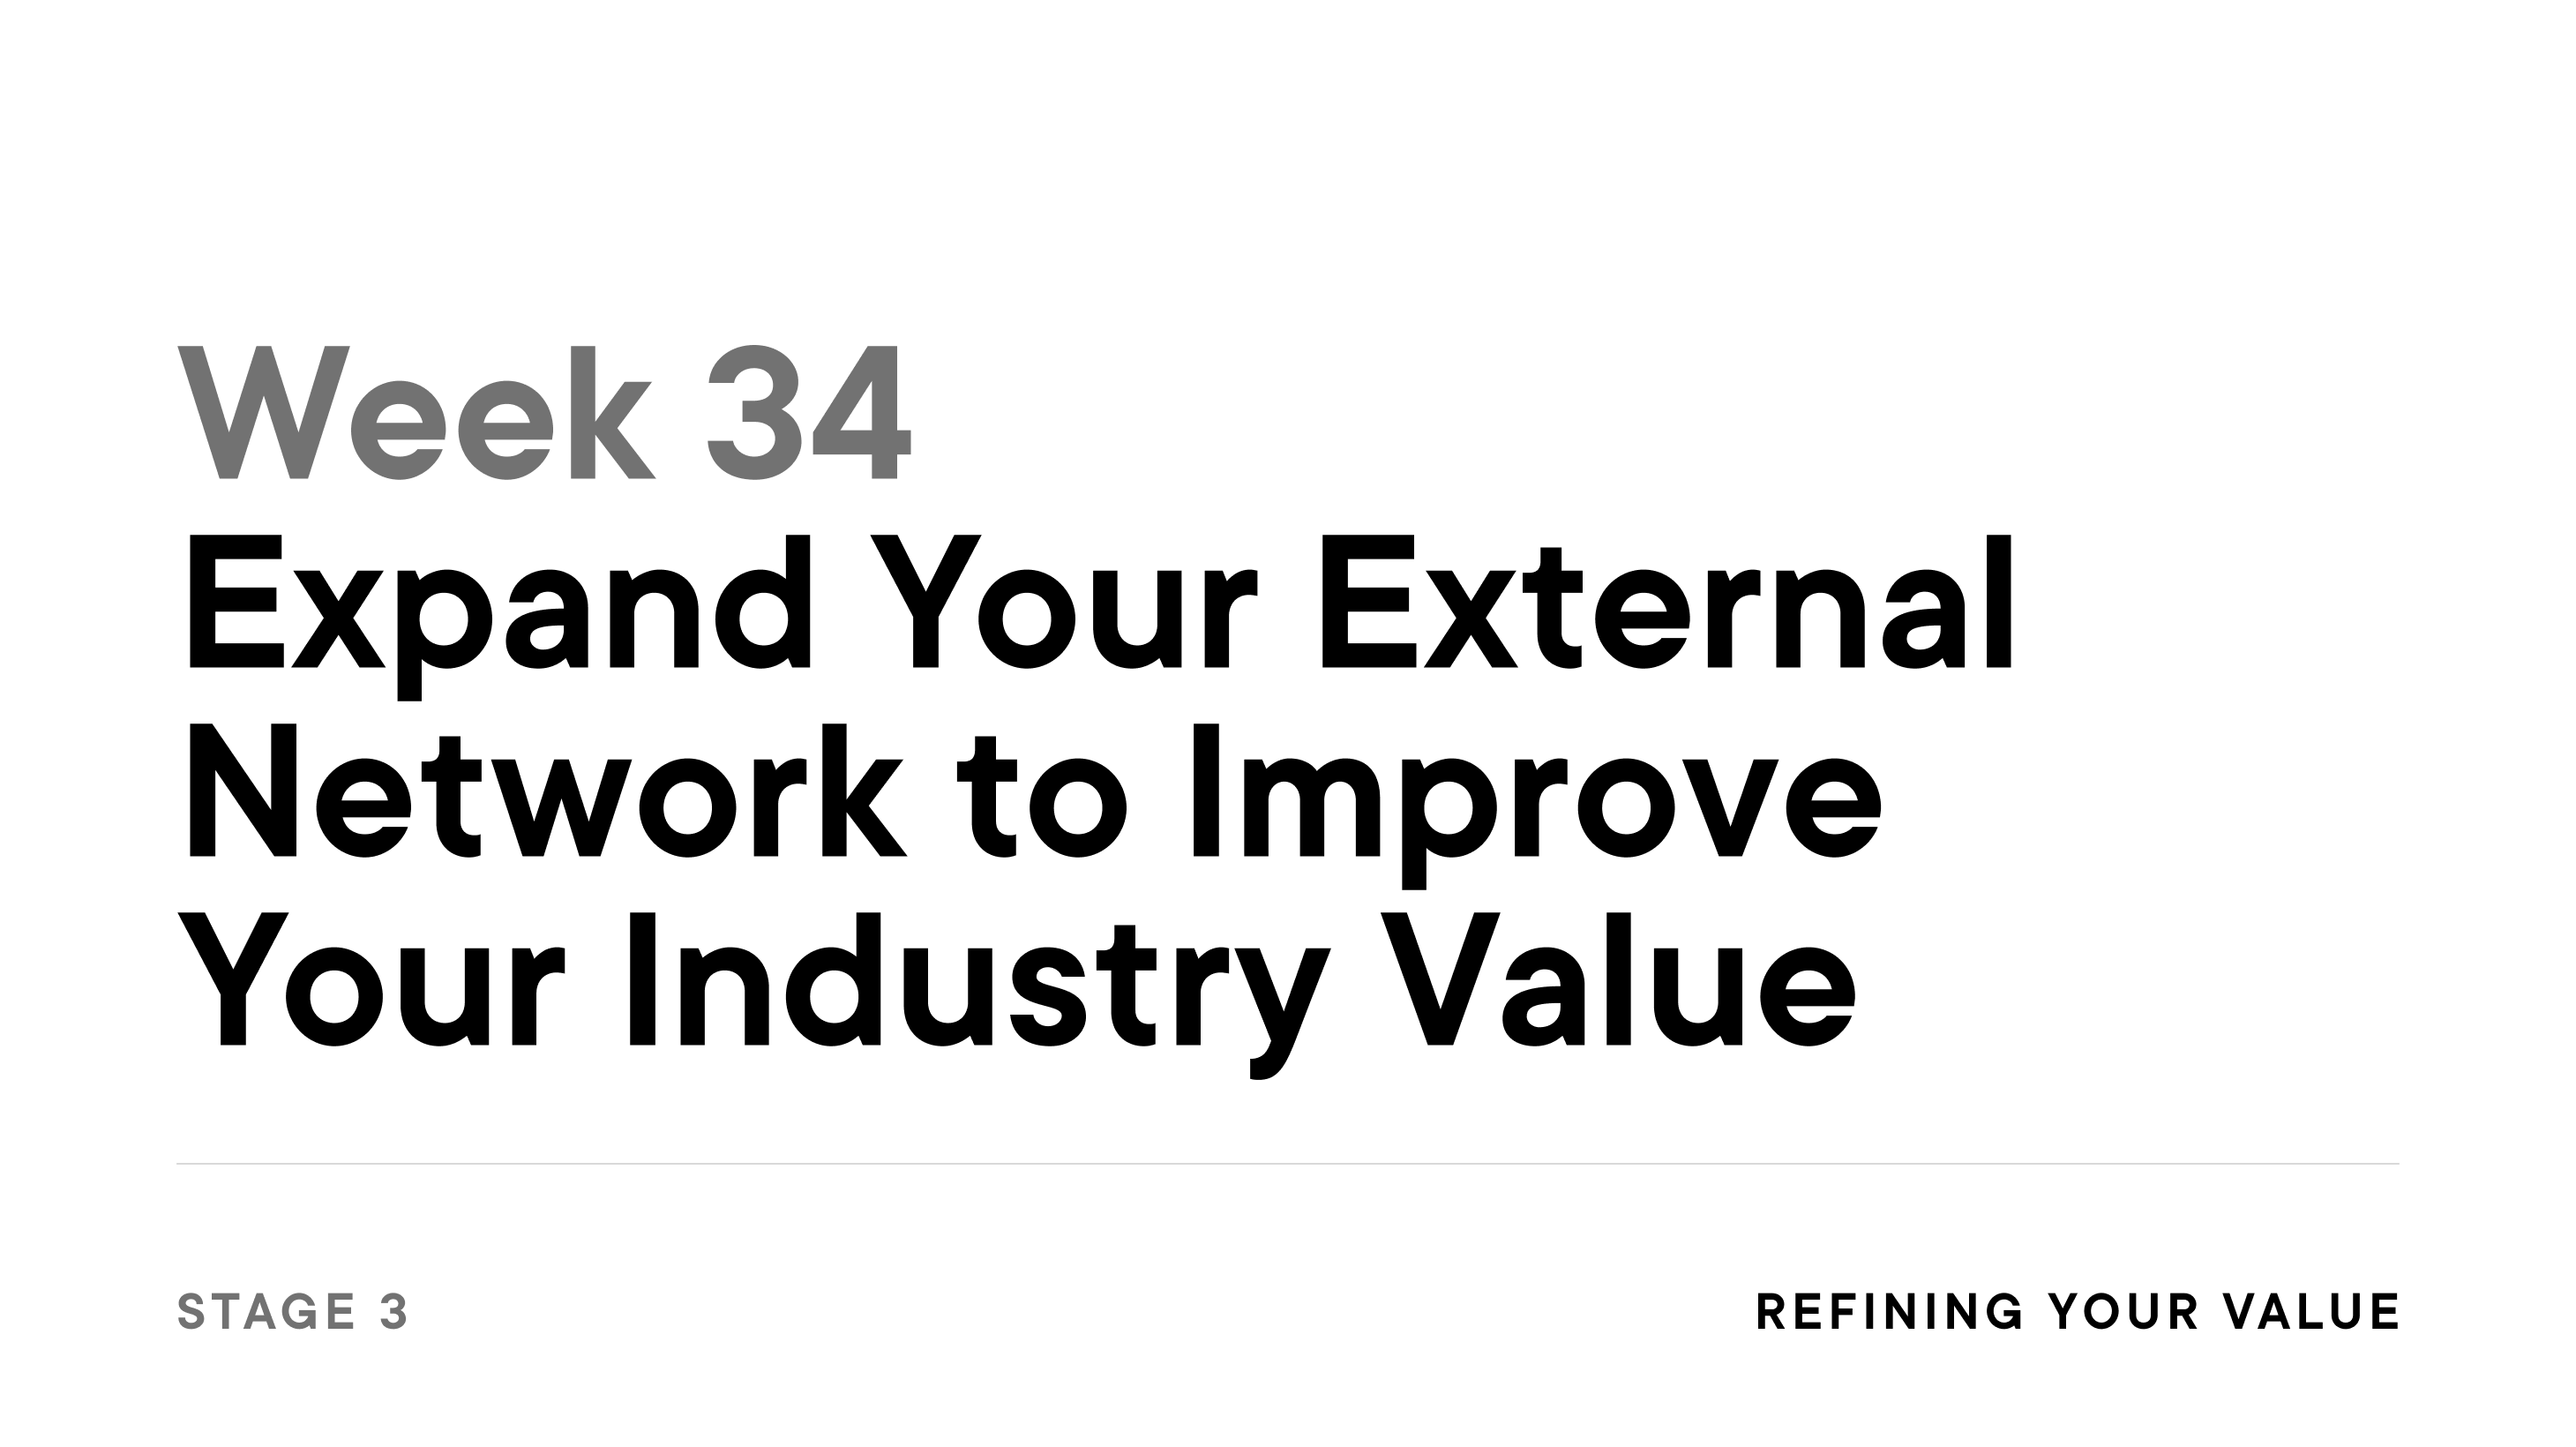 Week 34: Expand Your External Network to Improve Your Industry Value